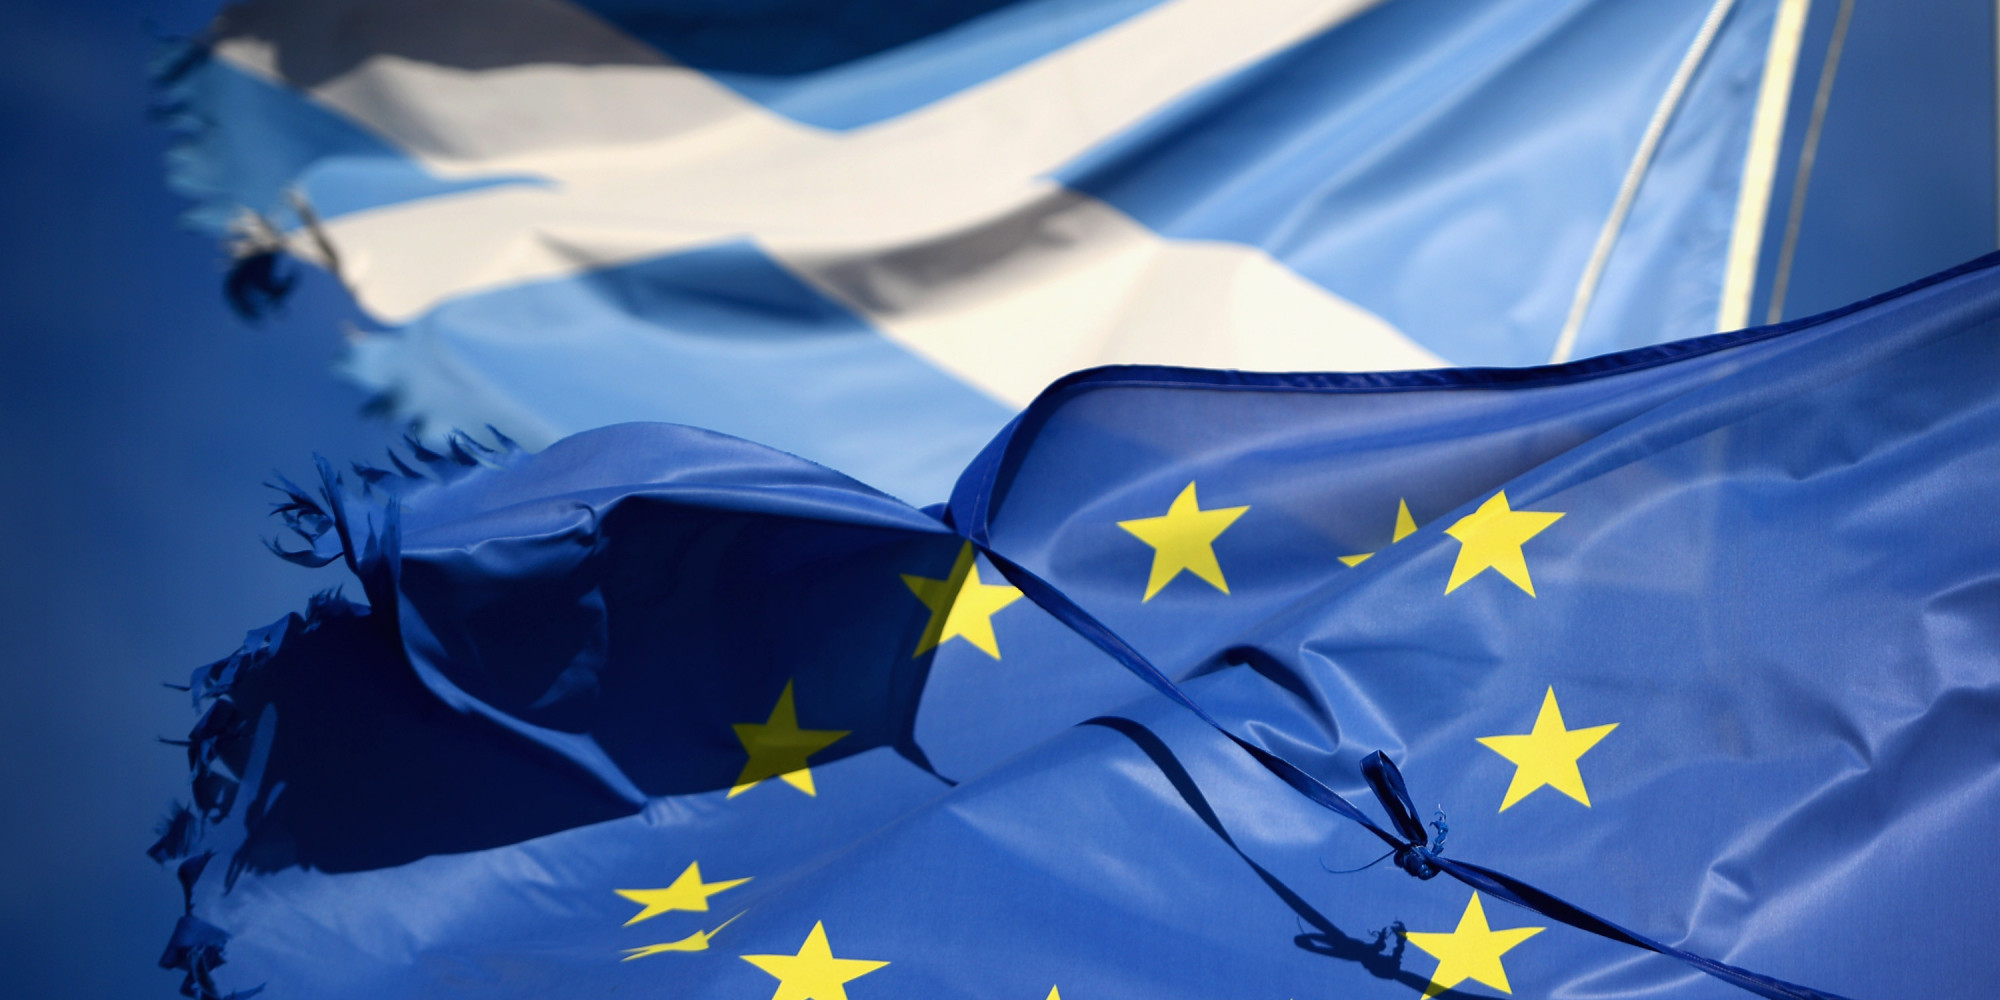 GLEN COE, SCOTLAND - MARCH 24: A European Union flag and Saltire flag blow in the wind near to Glen Coe on March 24, 2014 in Glen Coe, Scotland. A referendum on whether Scotland should be an independent country will take place on September 18, 2014. (Photo by Jeff J Mitchell/Getty Images)